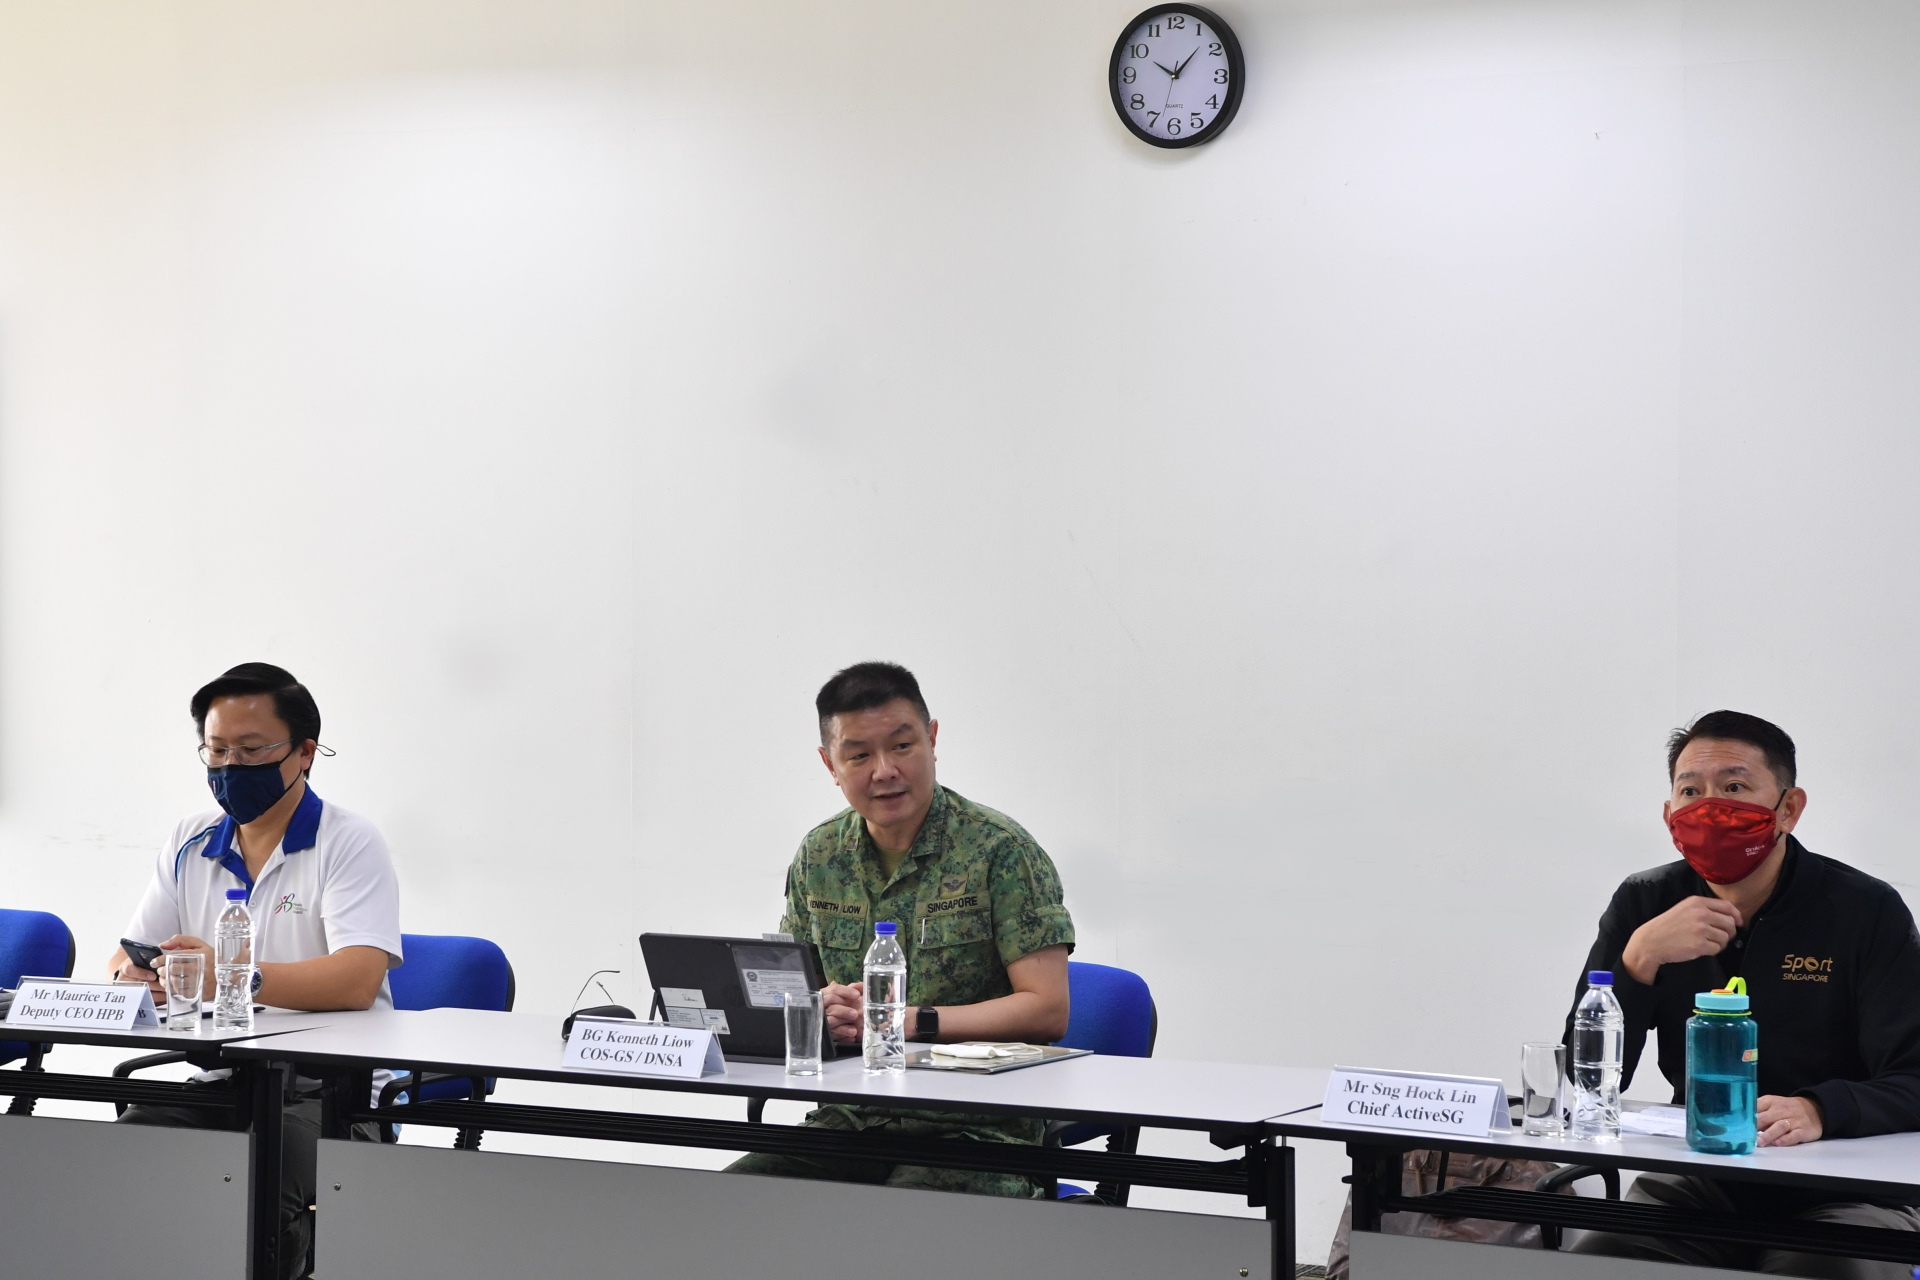 Chief of Staff – General Staff / Director National Service Affairs, Brigadier-General (BG) Kenneth Liow briefing the media on the National Service Fitness Improvement Training (NS FIT) with Deputy Chief Executive Officer, Health Promotion Board (HPB), Mr Maurice Tan (right) and Chief ActiveSG Mr Sng Hock Lin (left).